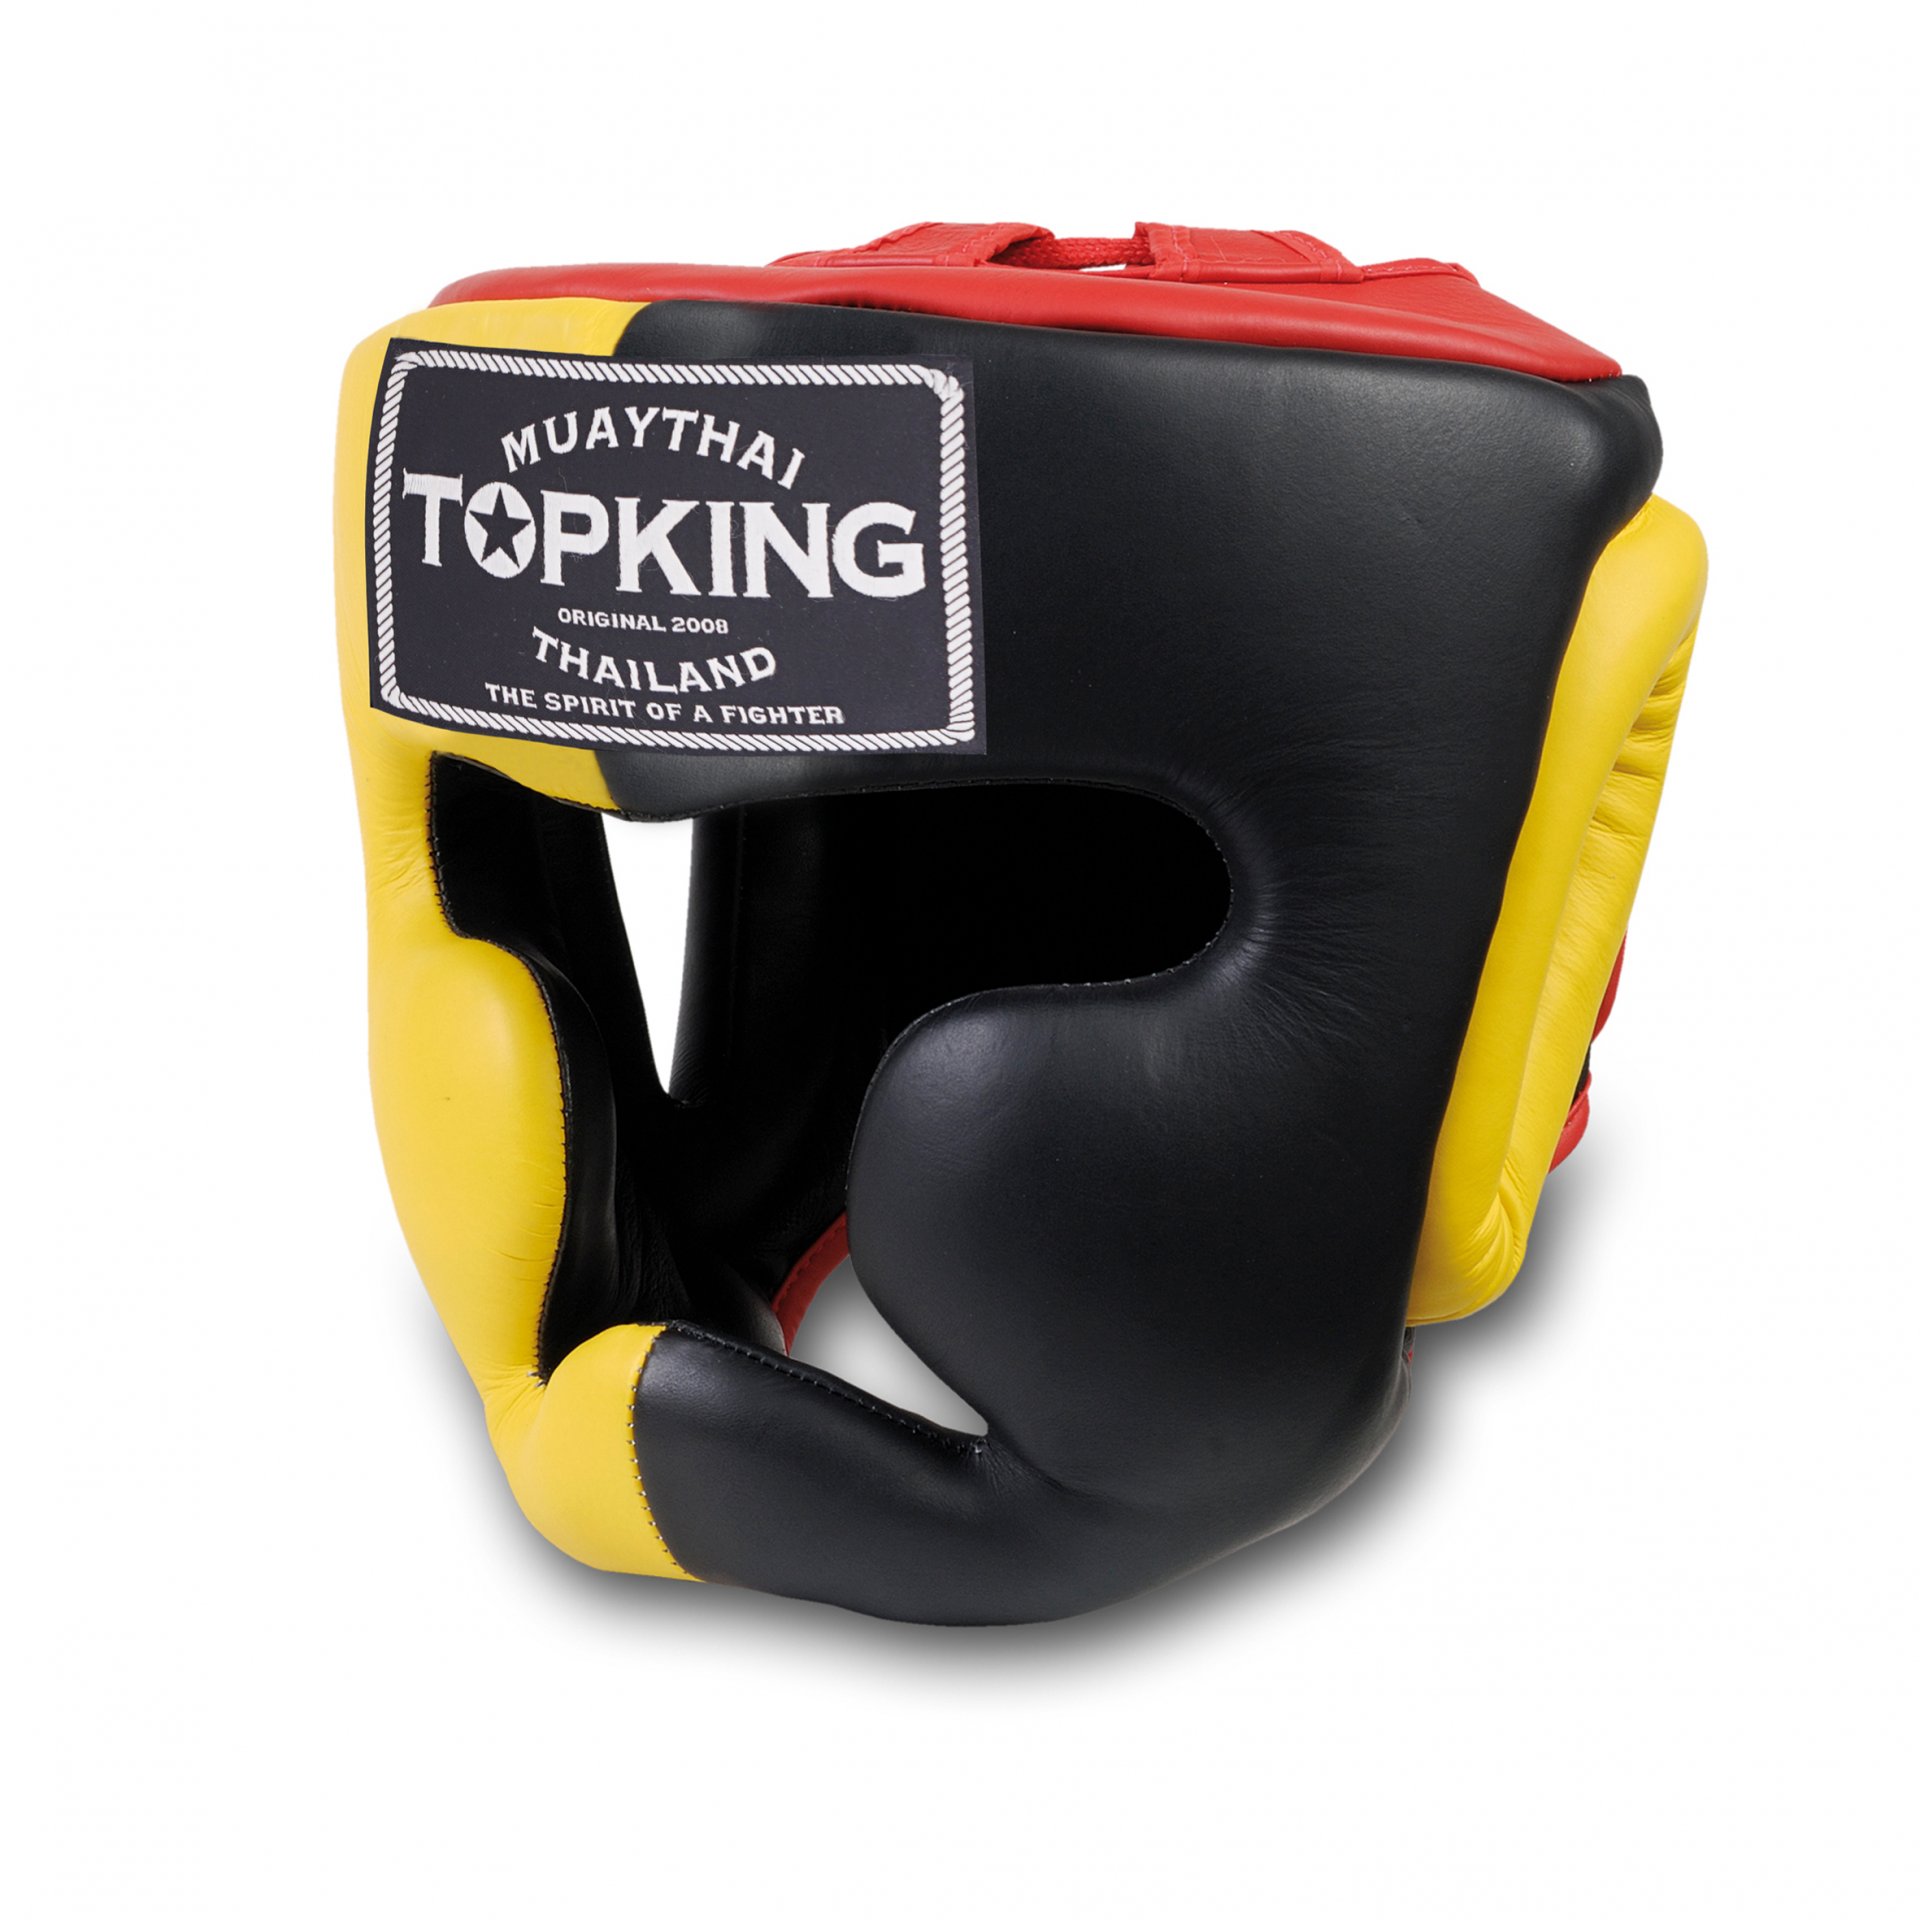 TOPKING HEAD GUARD “EXTRA COVERAGE” TRAINING LACE-UP & VELCRO CLOSURE